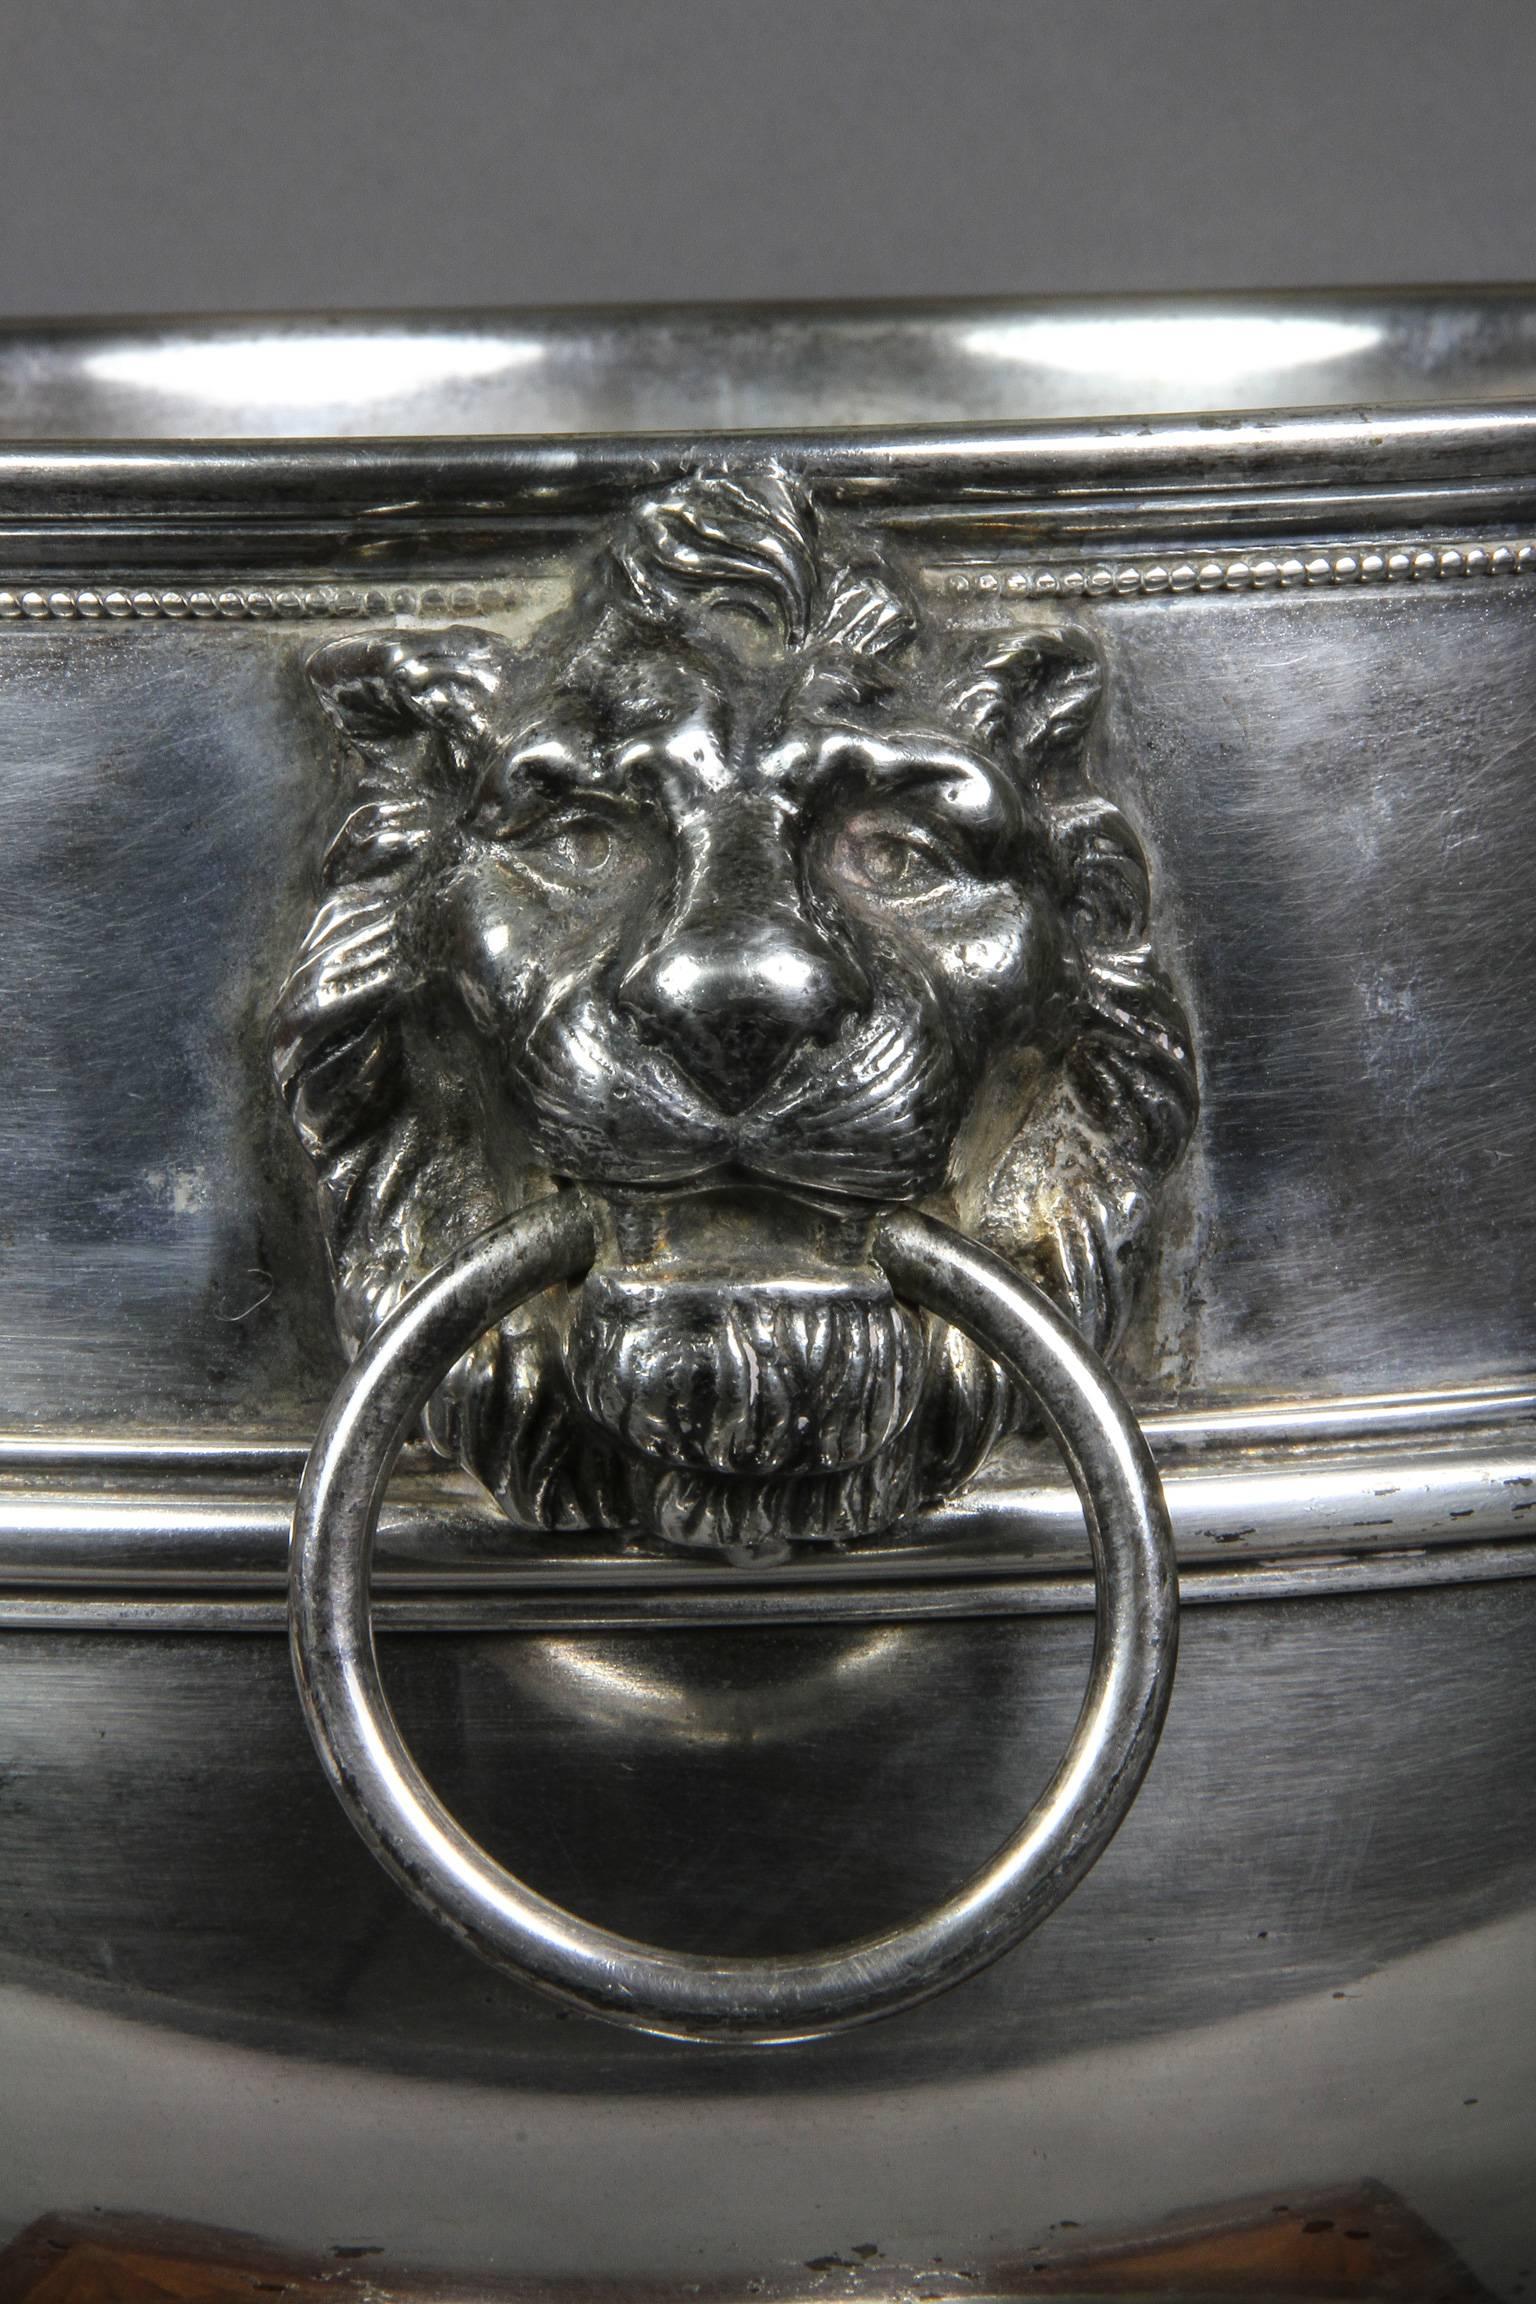 19th Century Regency Silver Plated Footed Punch Bowl Bearing the Arms of the City of Bath